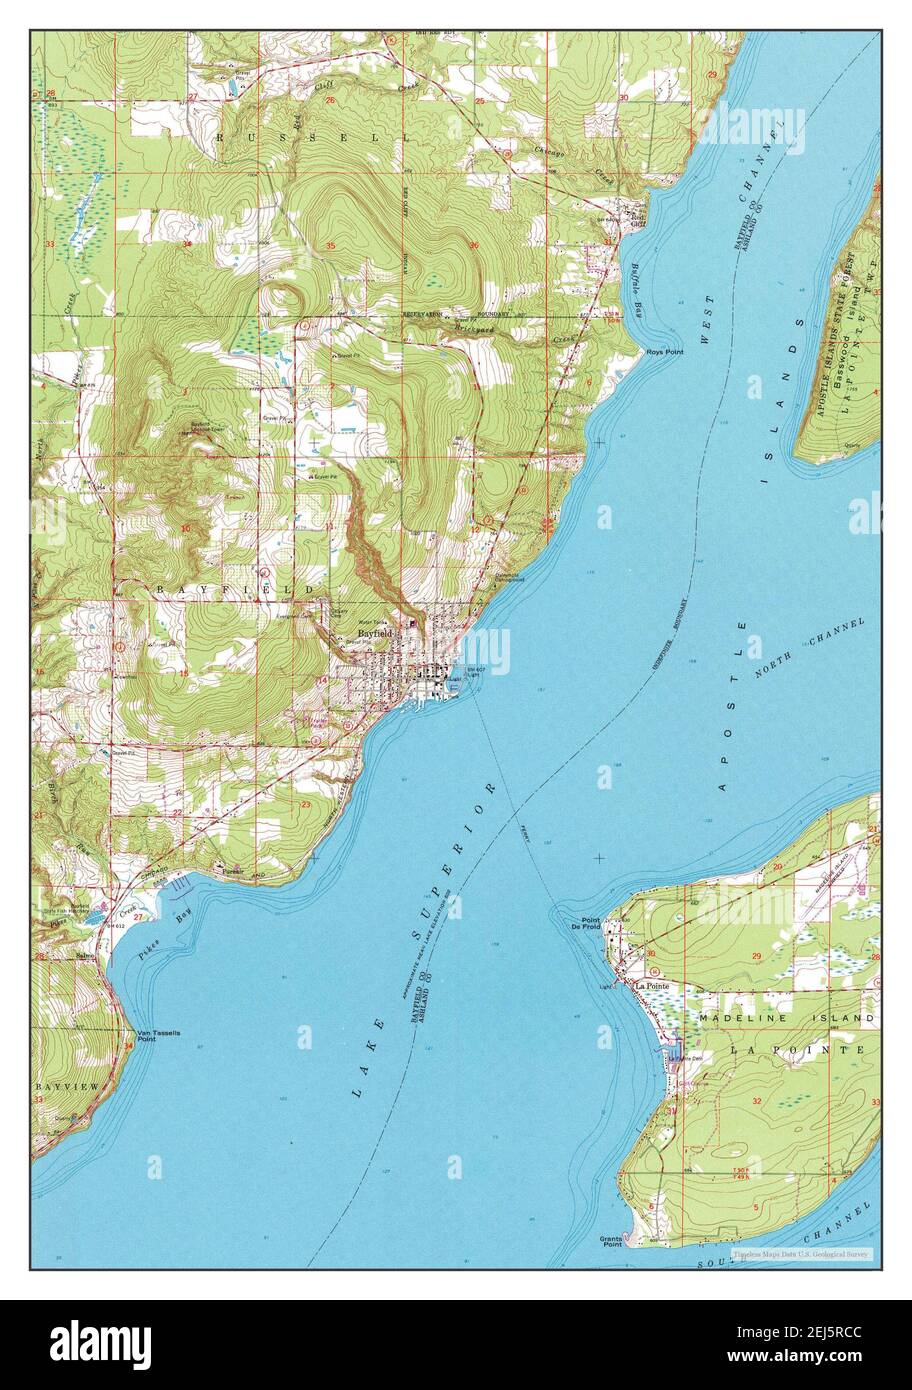 Bayfield Wisconsin Map 1964 124000 United States Of America By Timeless Maps Data Us Geological Survey 2EJ5RCC 